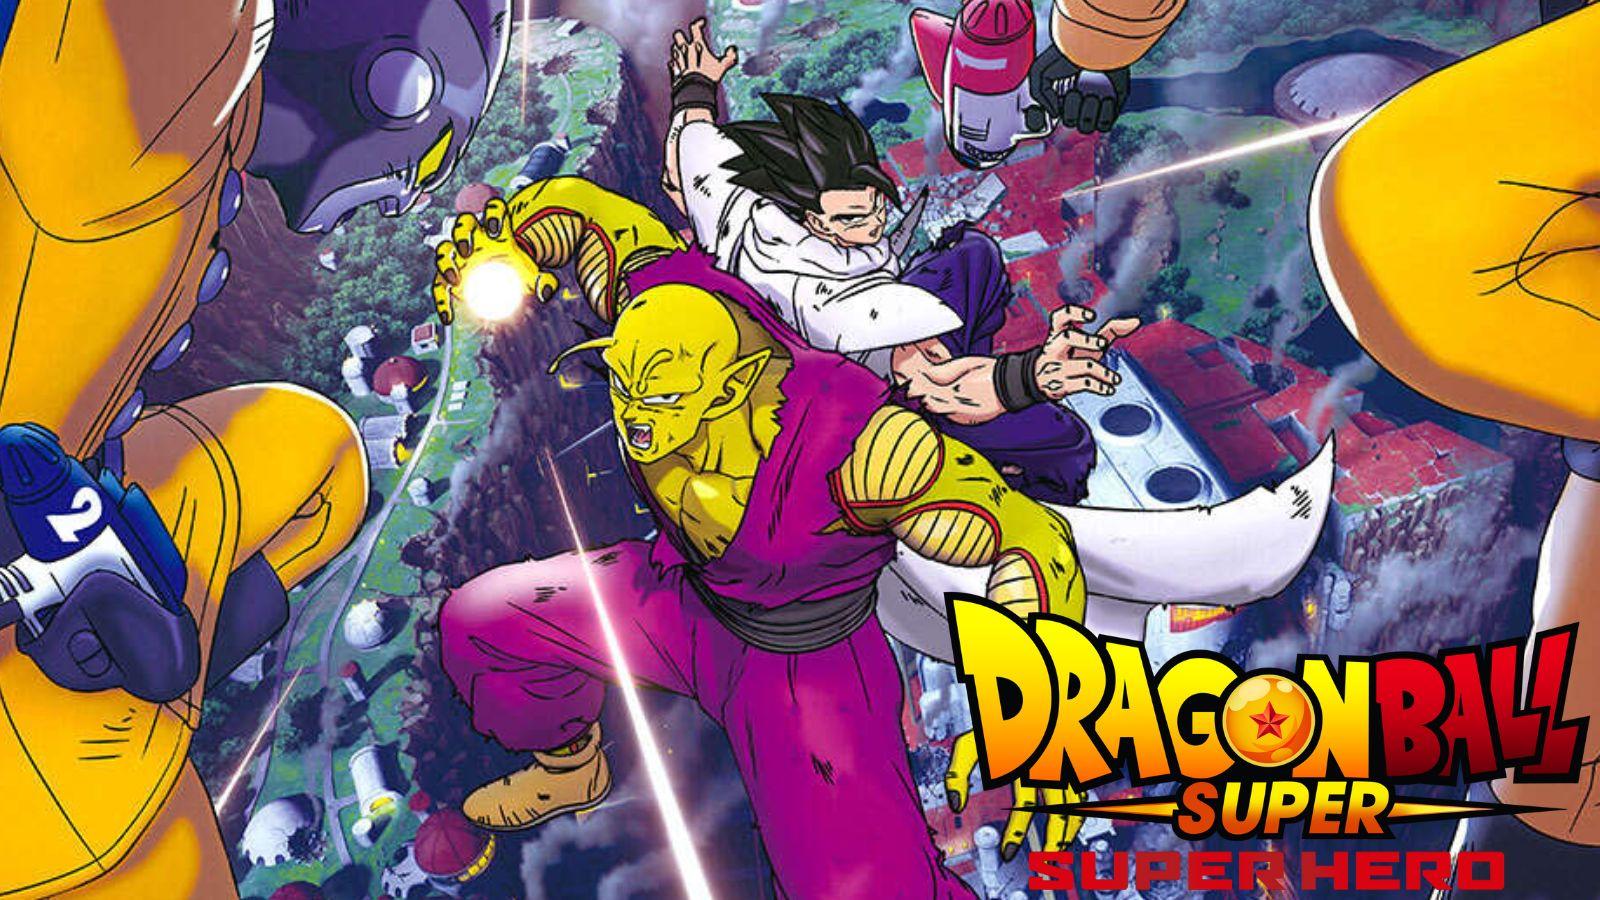 ShonenGames on X: Super Dragon Ball Heroes Is Getting An Anime, First Scan  & Poster Revealed   / X